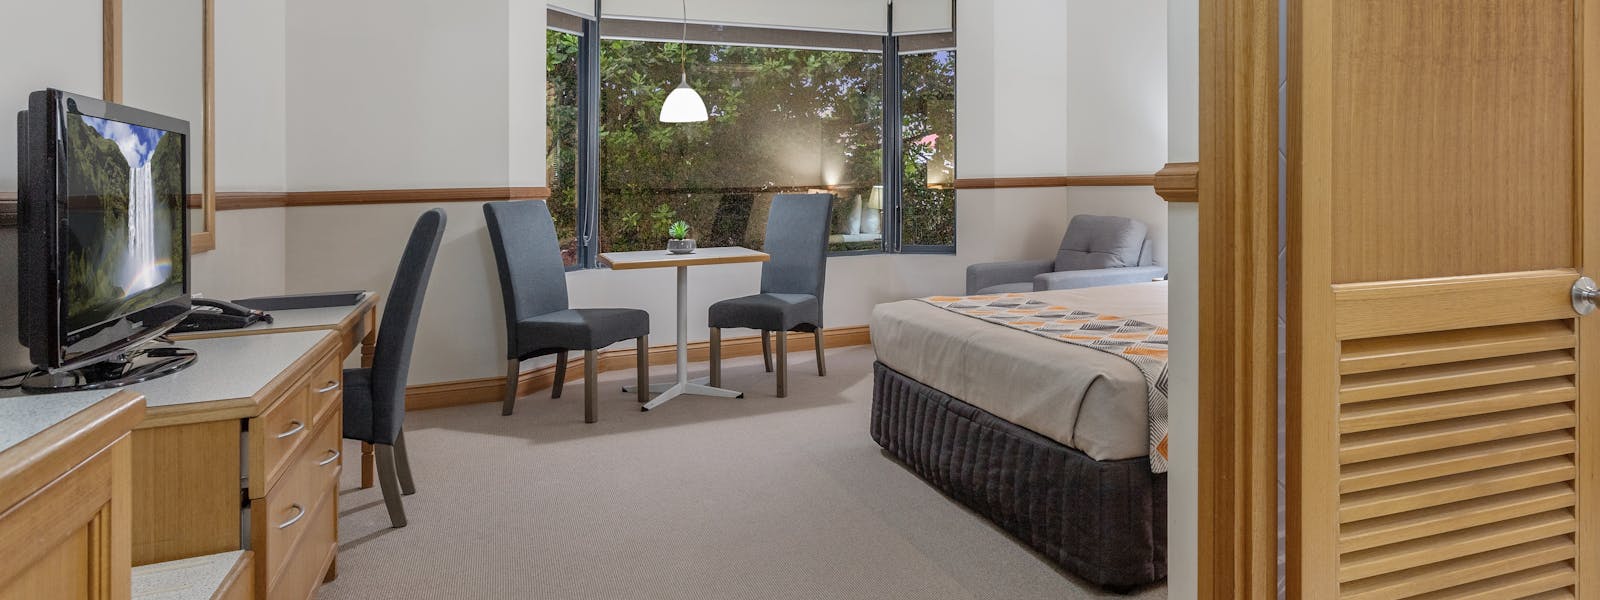 Deluxe suites close to Brisbane airports